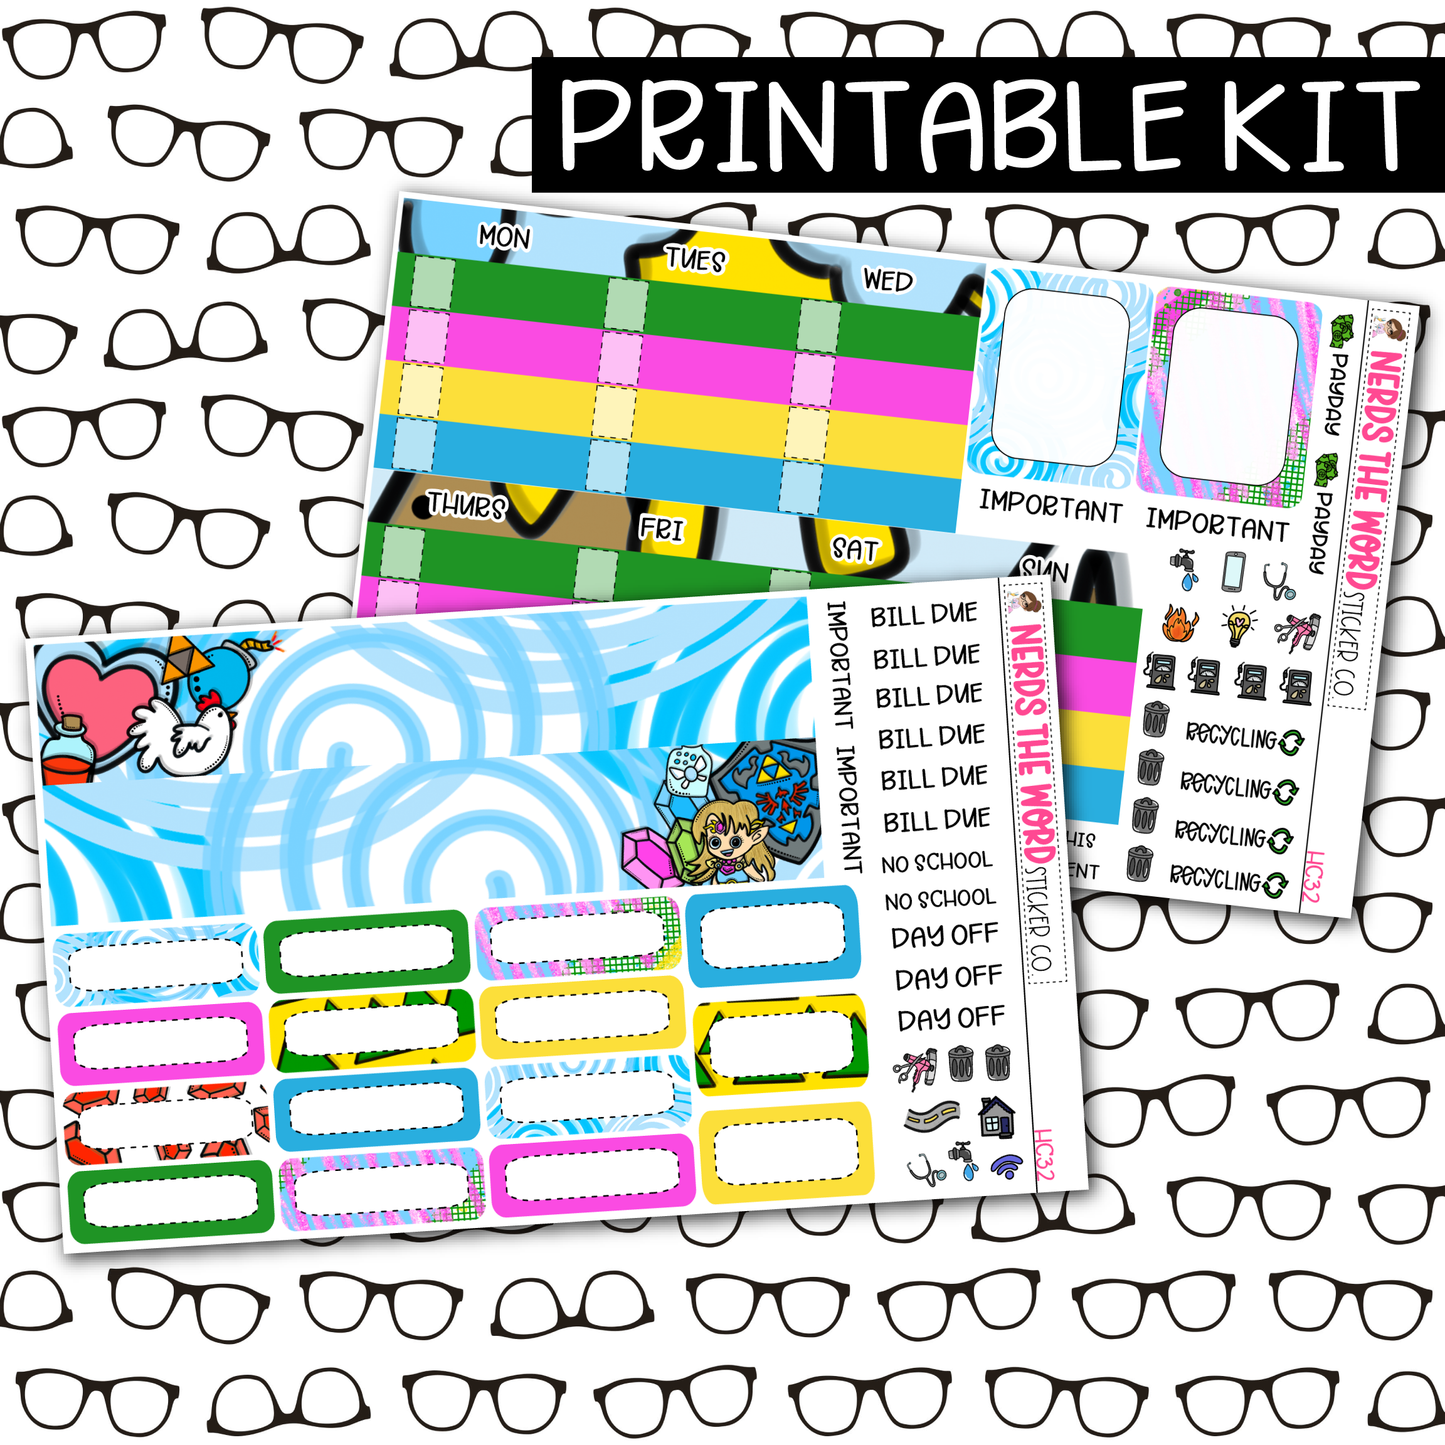 PRINTABLE Link Monthly Kit - Choose your Size